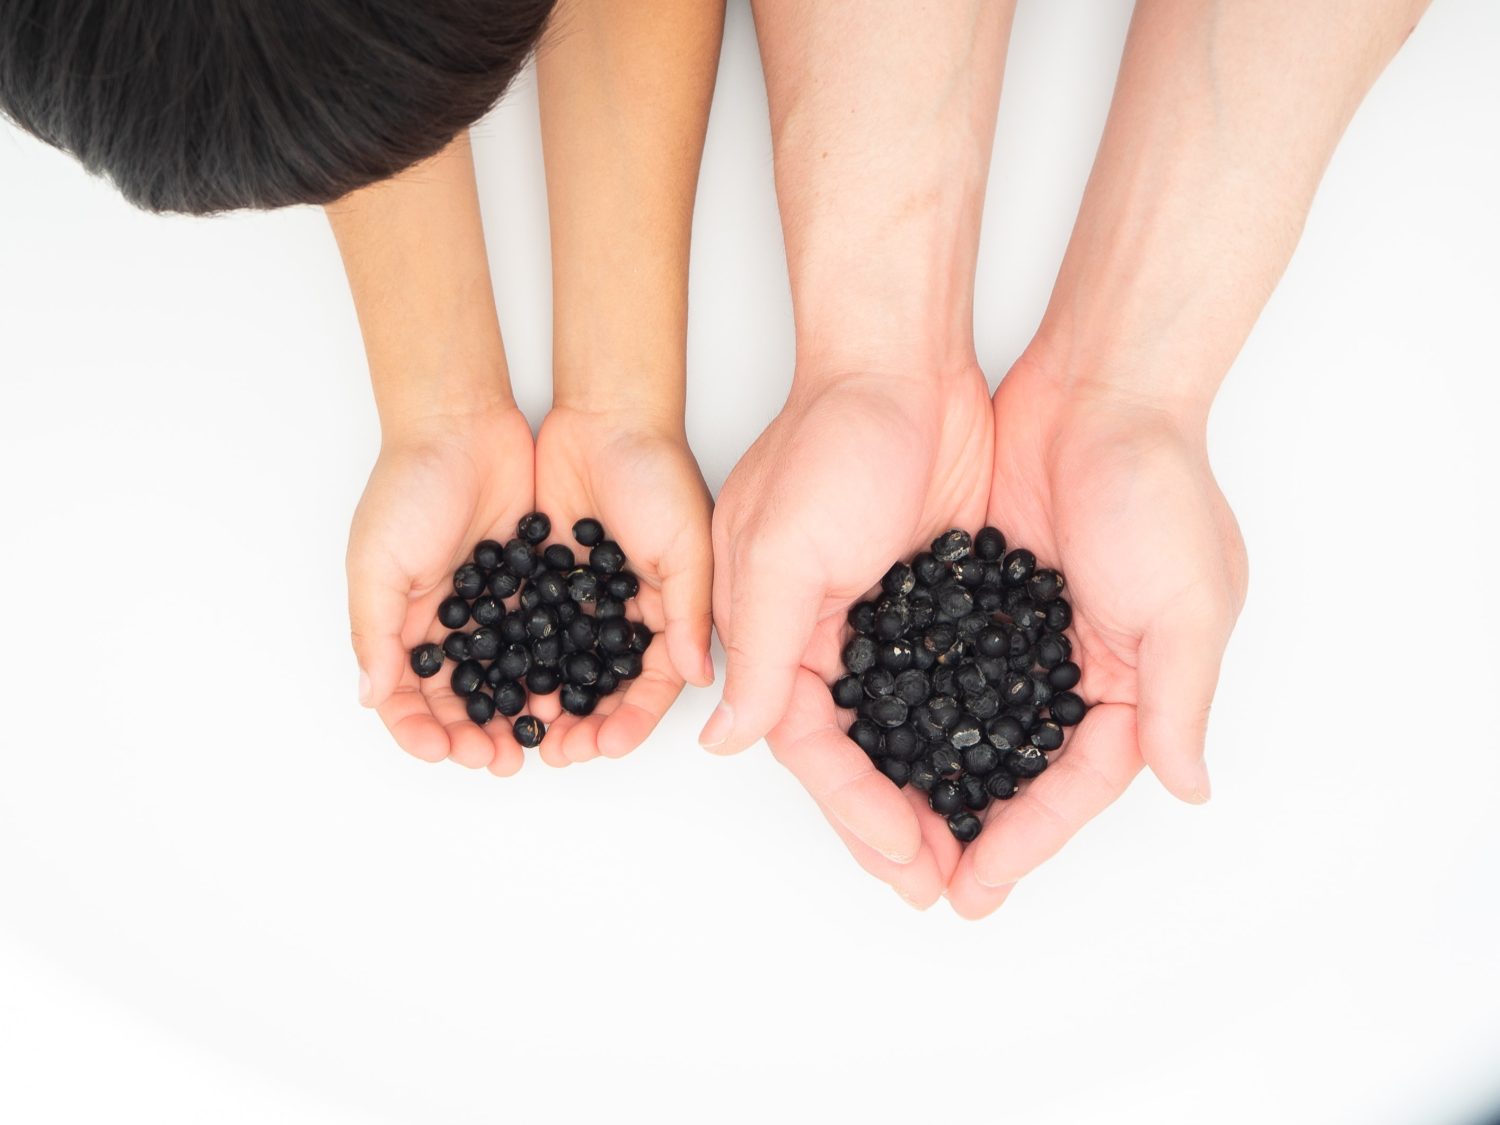 two-sets-of-hands-holding-black-soybeans